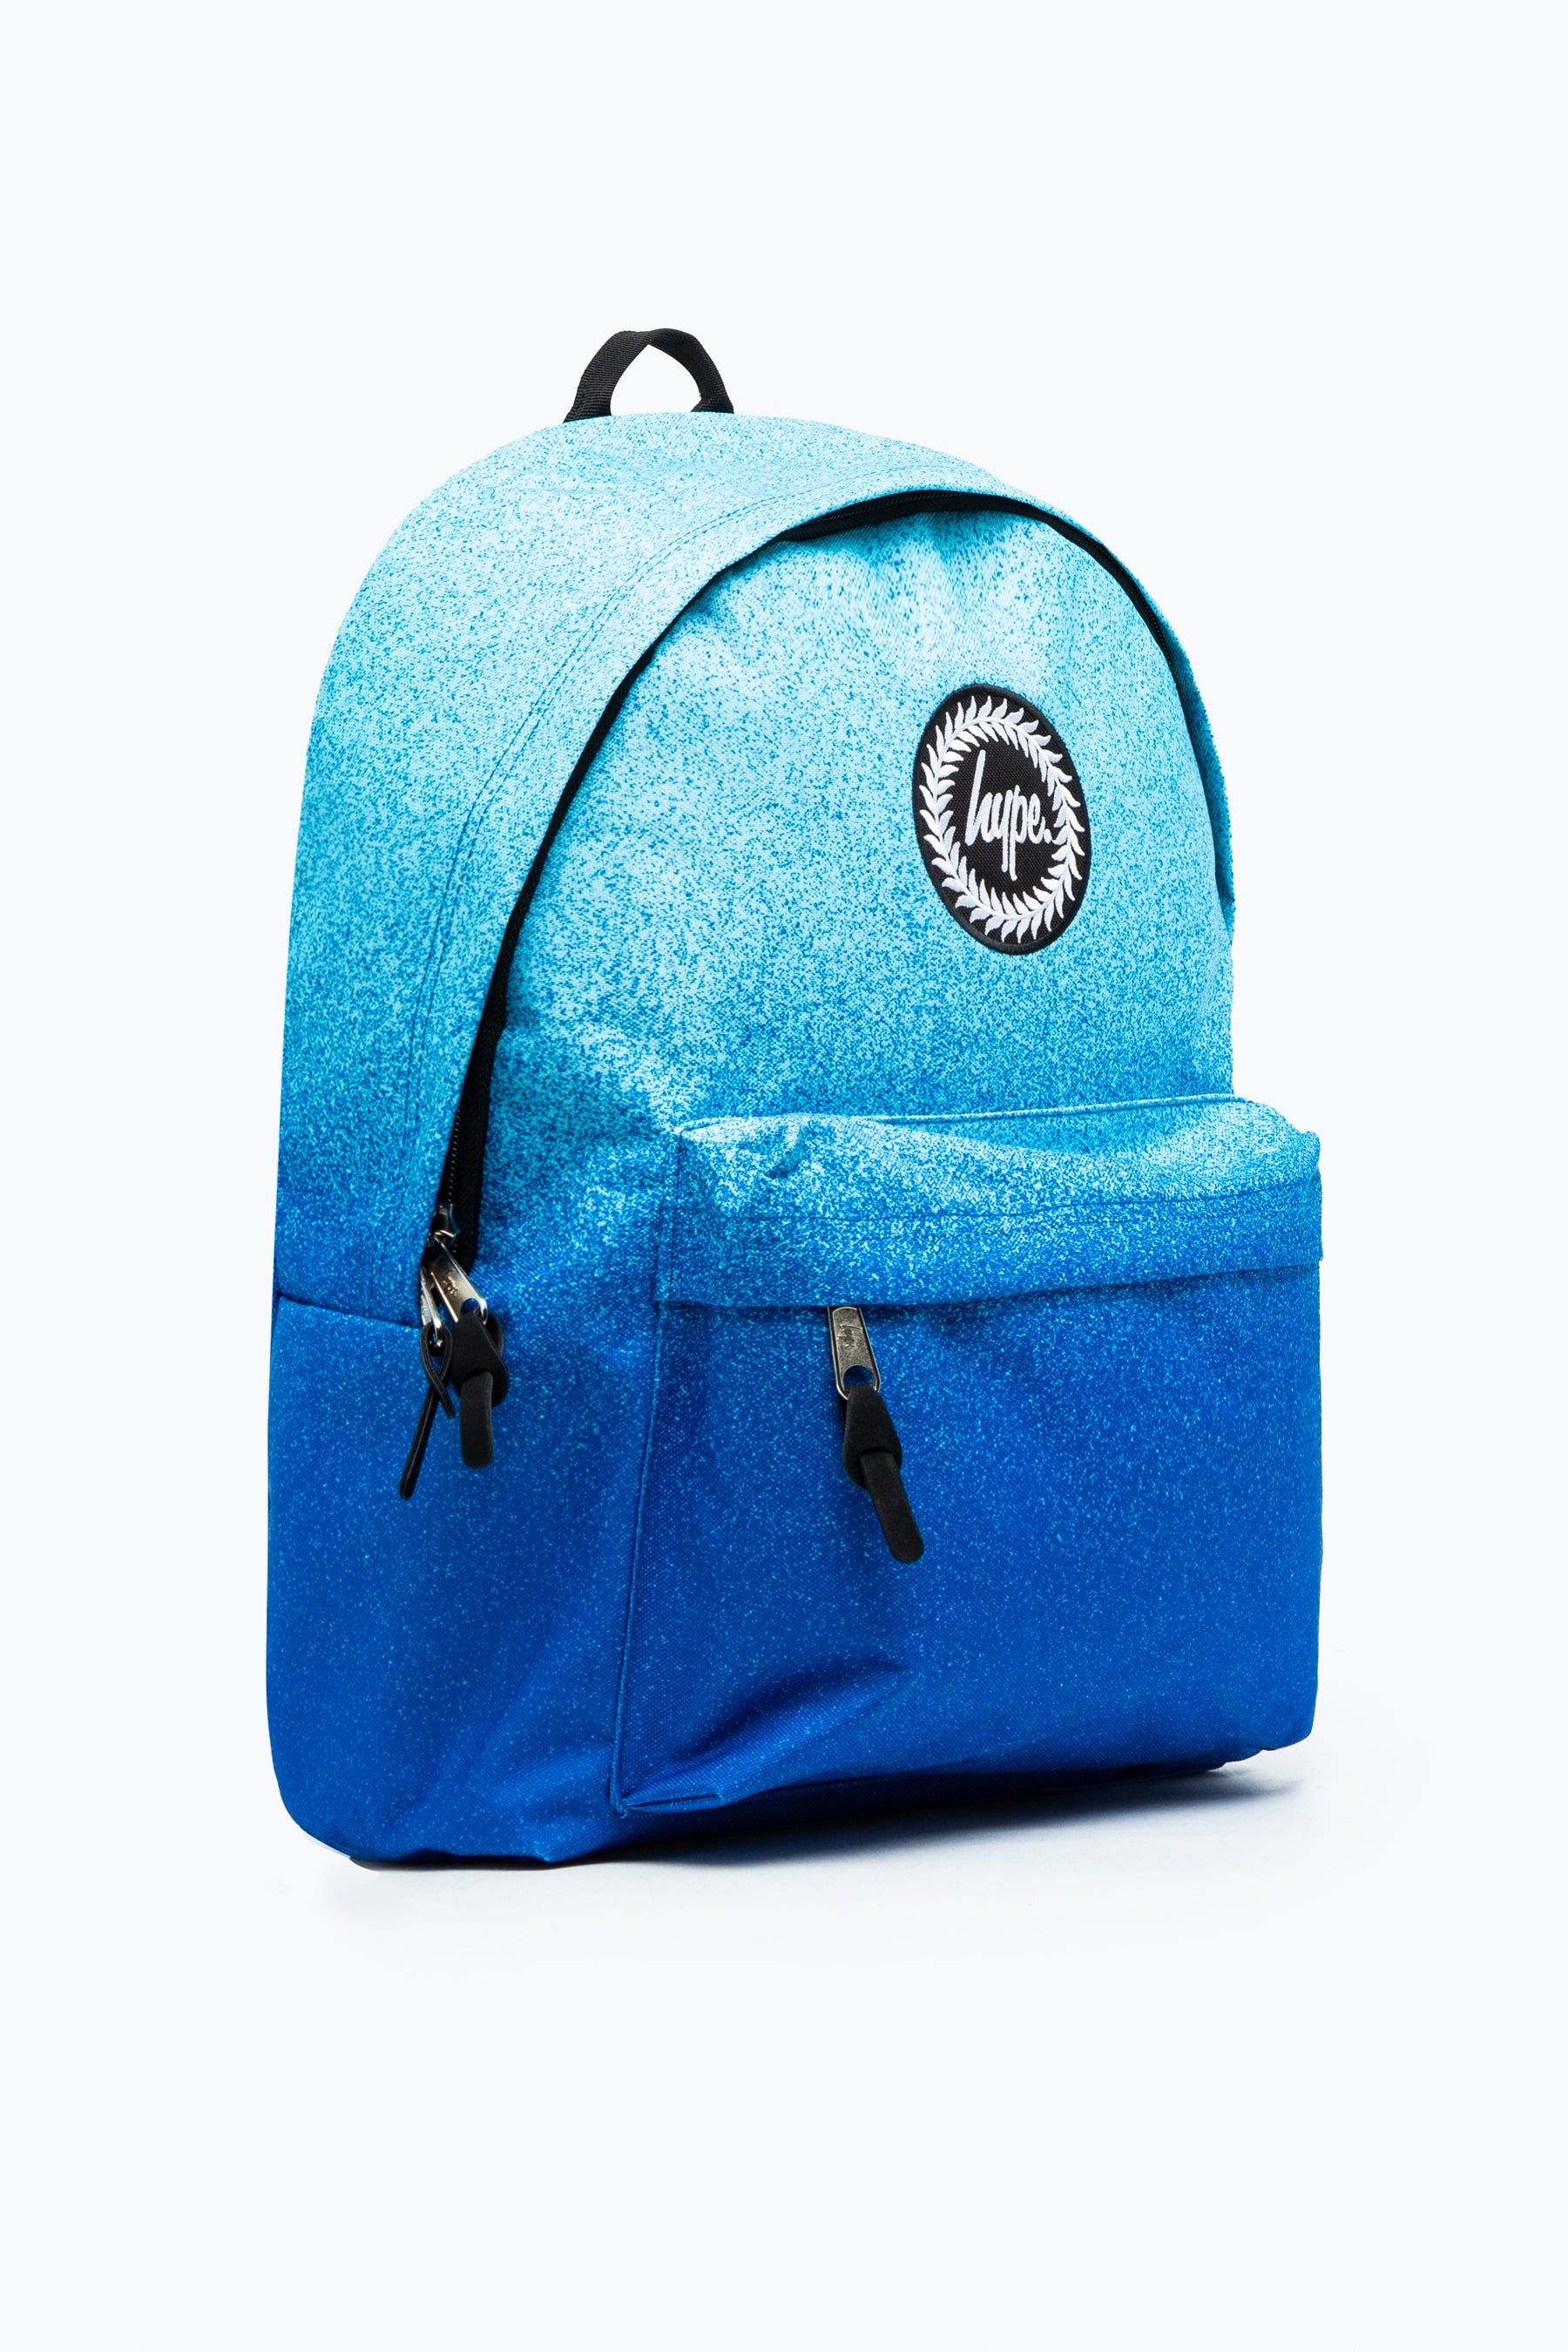 Let us introduce you to the HYPE. Blue Speckle Fade Backpack. Designed in our standard unisex backpack shape and design, measuring at 42cms x 30cms x 12cms, this is the perfect size to transport your matching pencil case, lunch bag and P.E kit. Finished with a front mini pocket, grab handle, embossed zips, branded inside lining and the iconic HYPE. crest badge in monochrome on the front. The straps offer supreme comfort with just the right amount of padding. Wipe clean only.